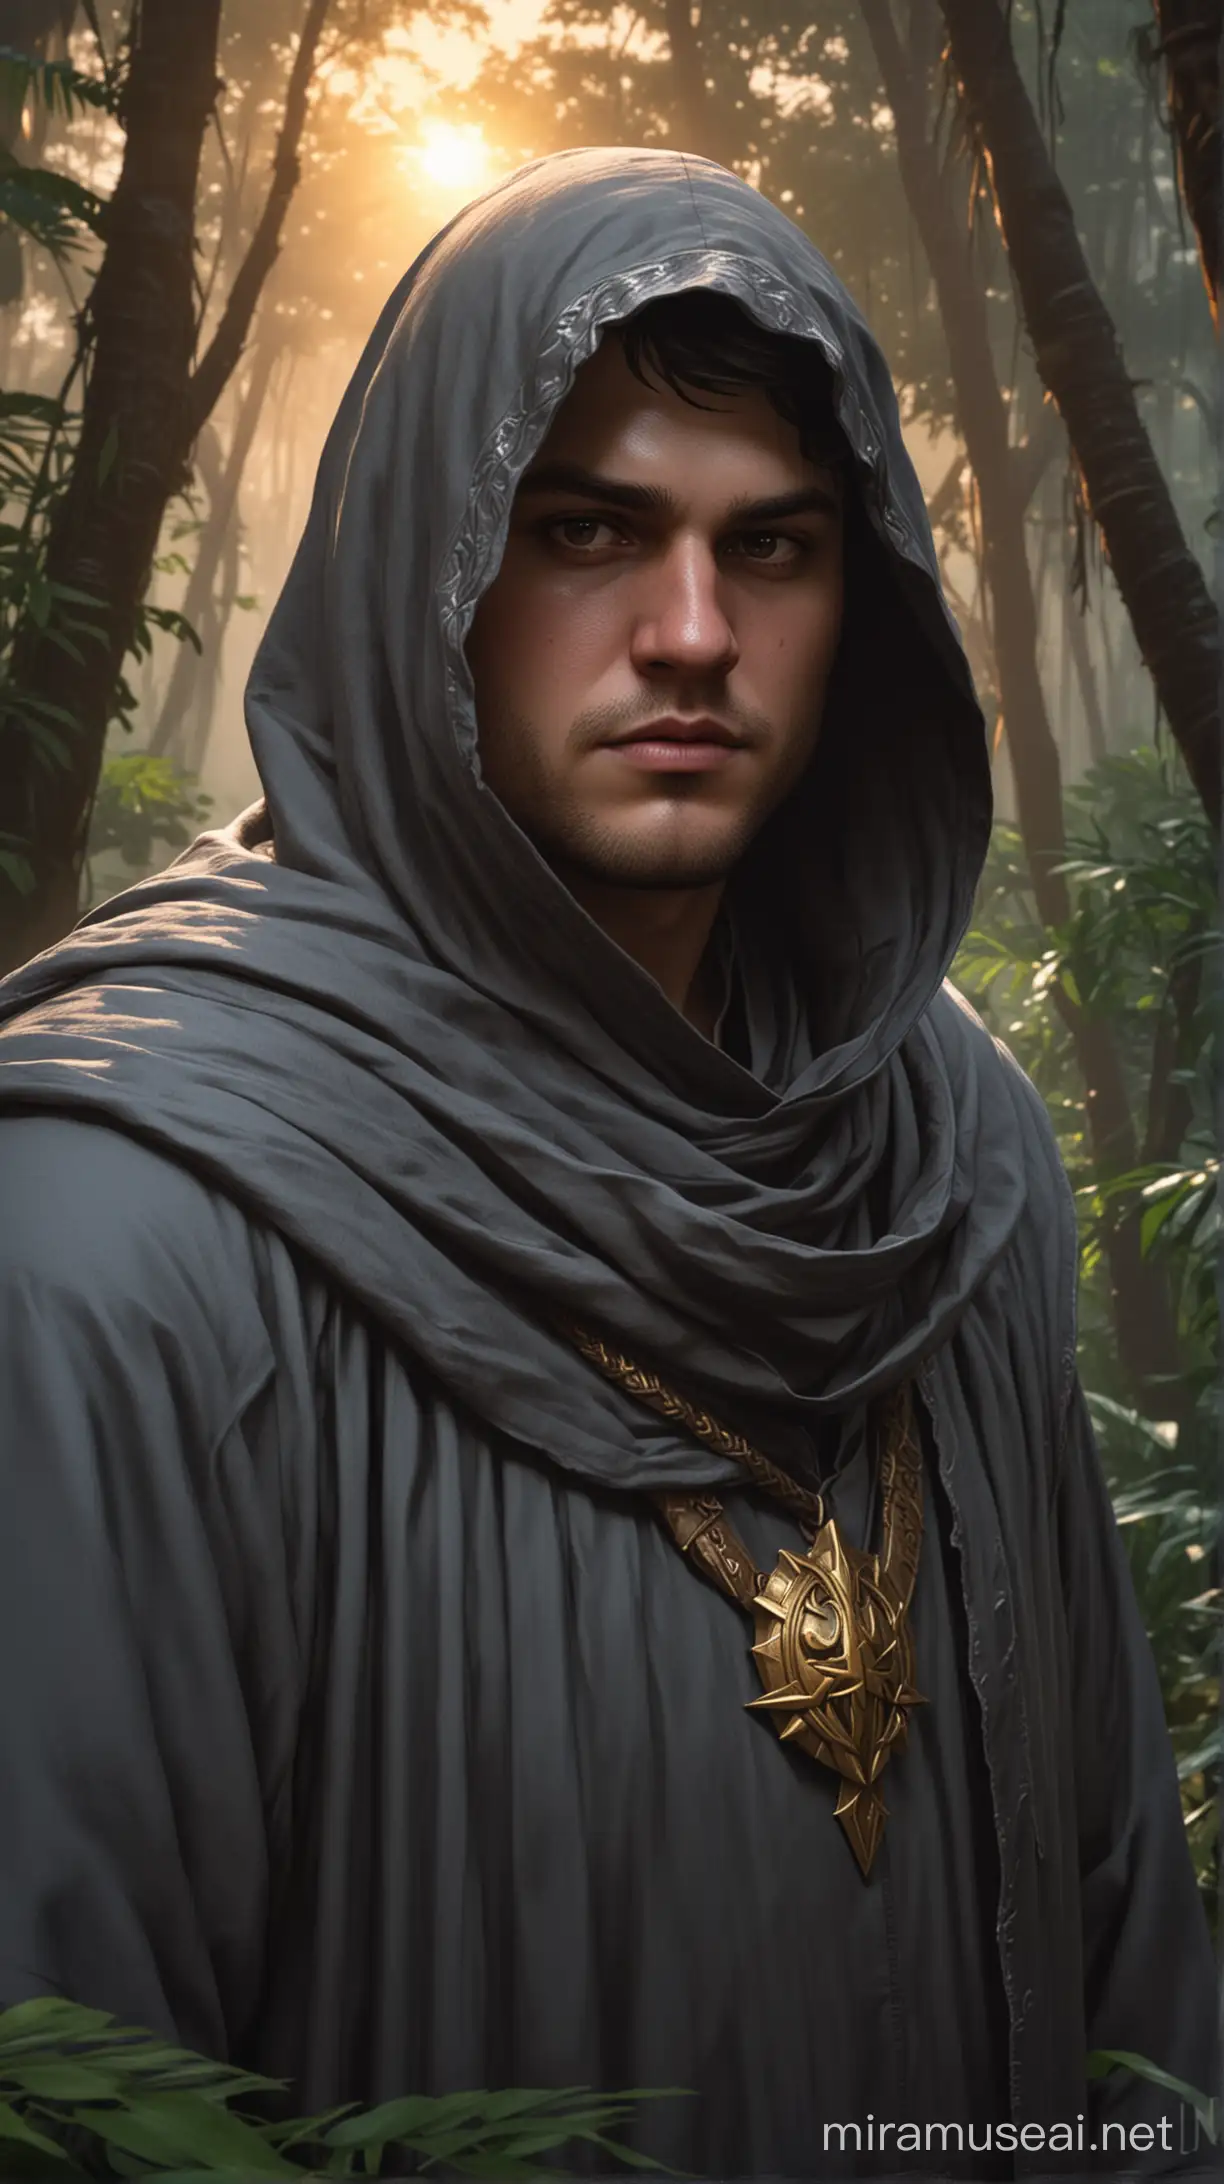 Twilight Cleric in Dark Gray Robes at Jungle Sunset